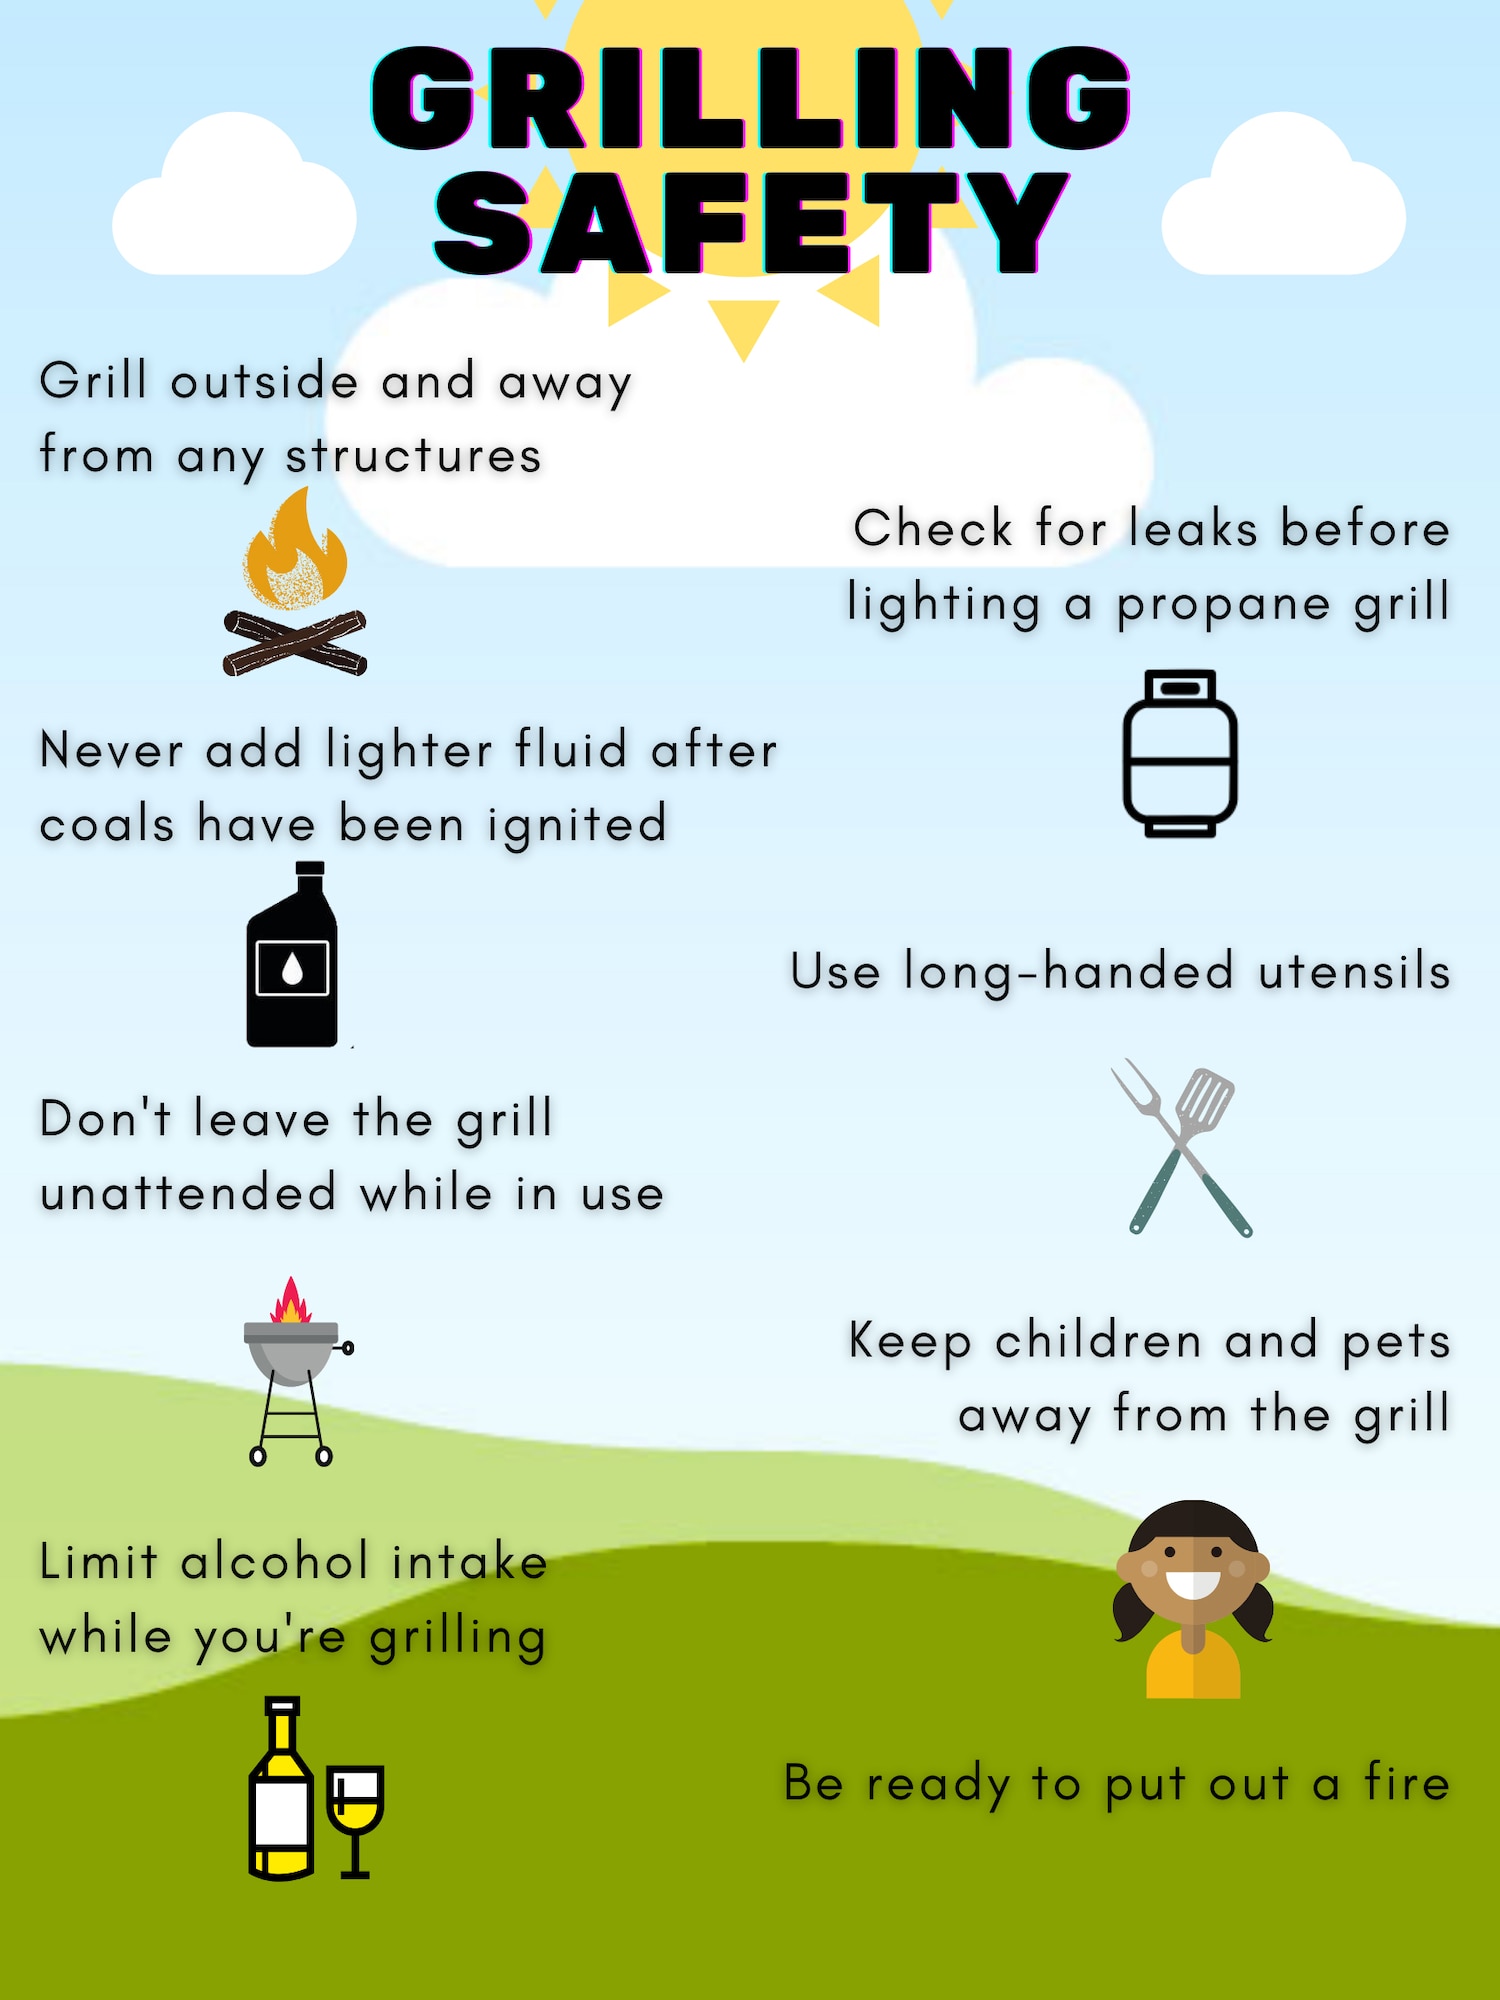 Infographic about grilling safety (U.S. Graphic by Tech. Sgt. Jennifer Stai)